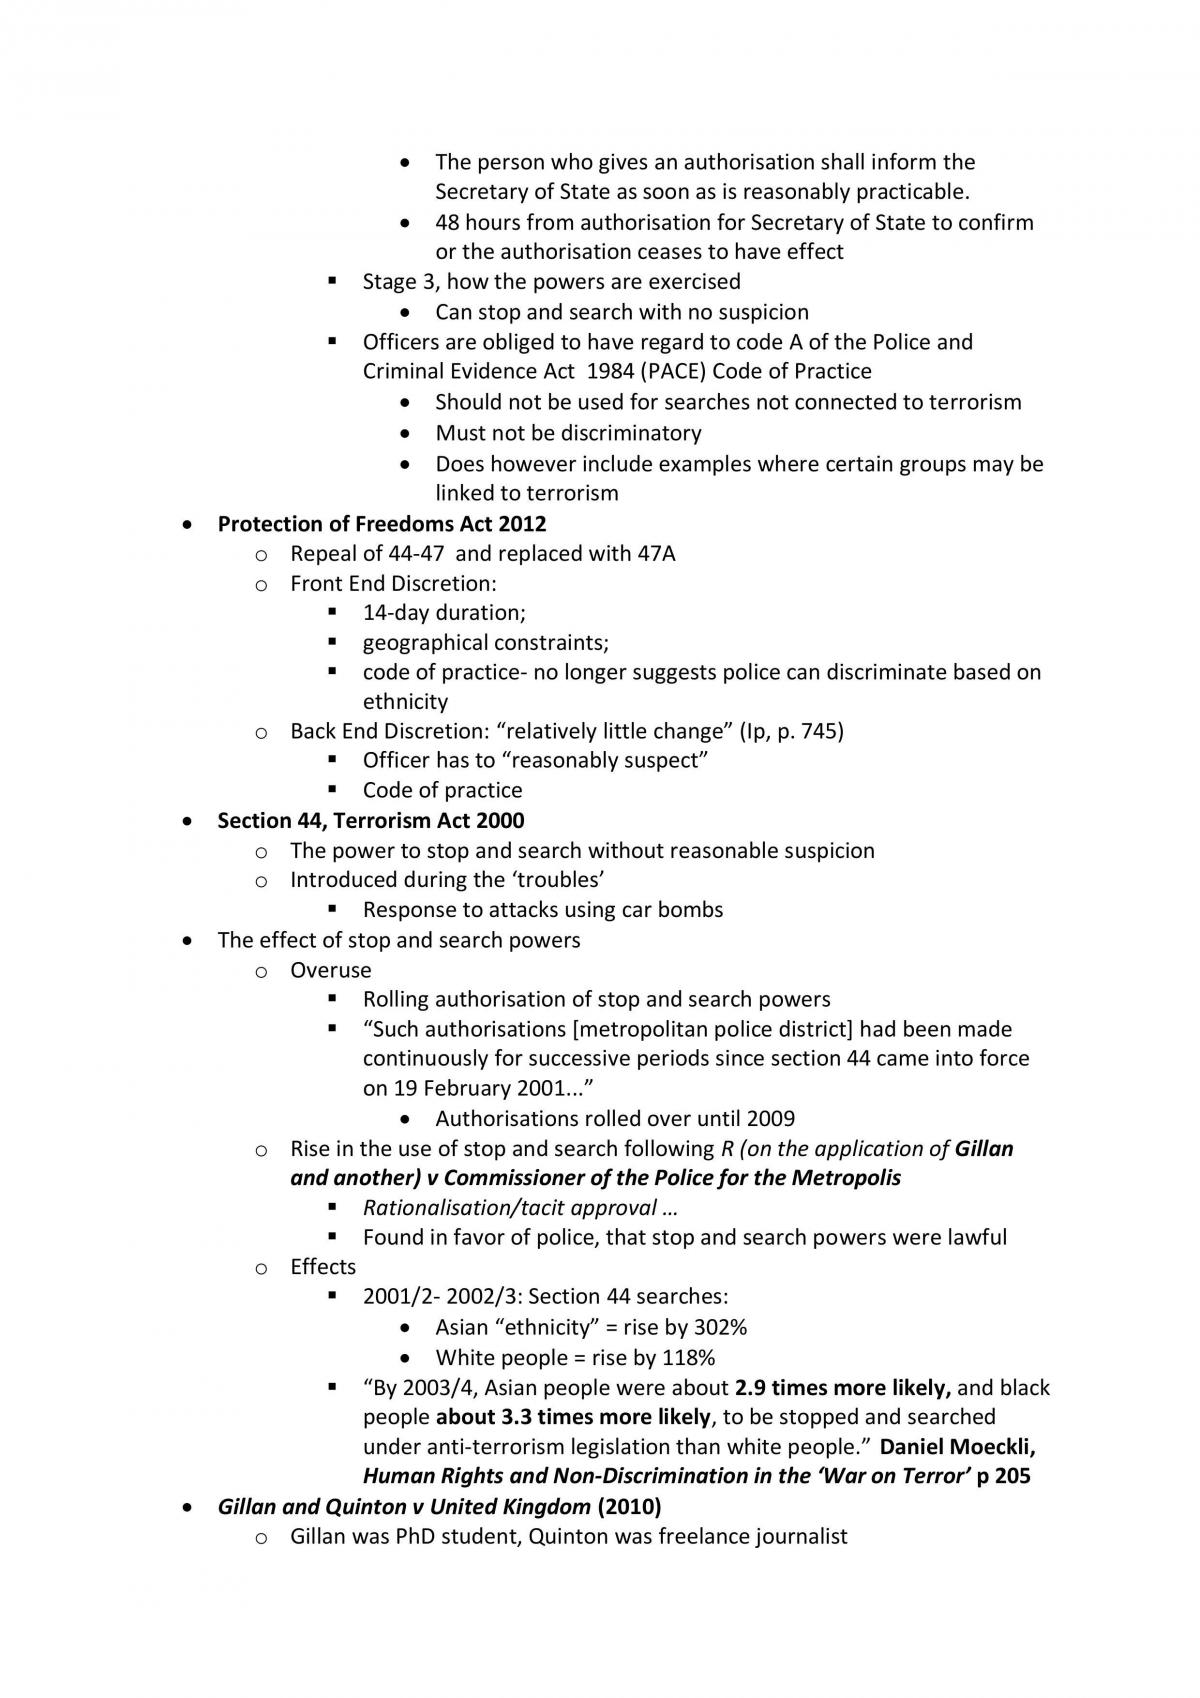 Security, Conflict and the Law full notes - Page 19